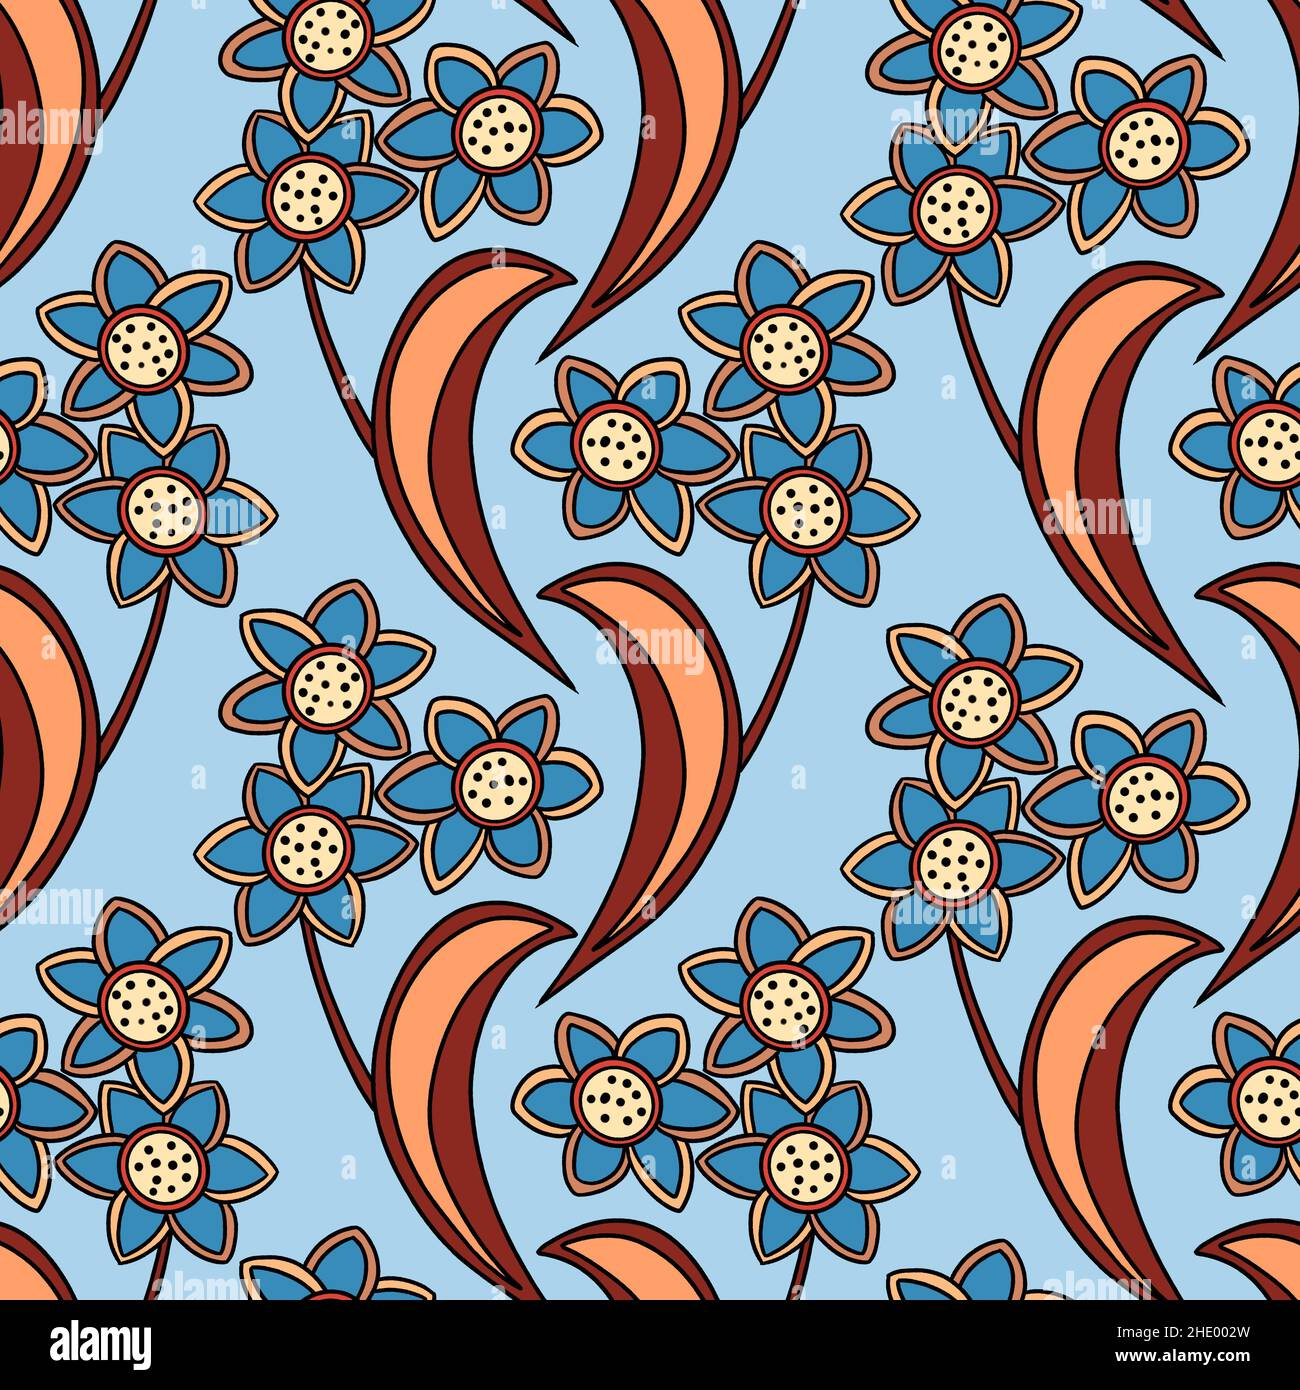 Illustration raster seamless paisley pattern with patterns on a blue background. High quality illustration Stock Photo